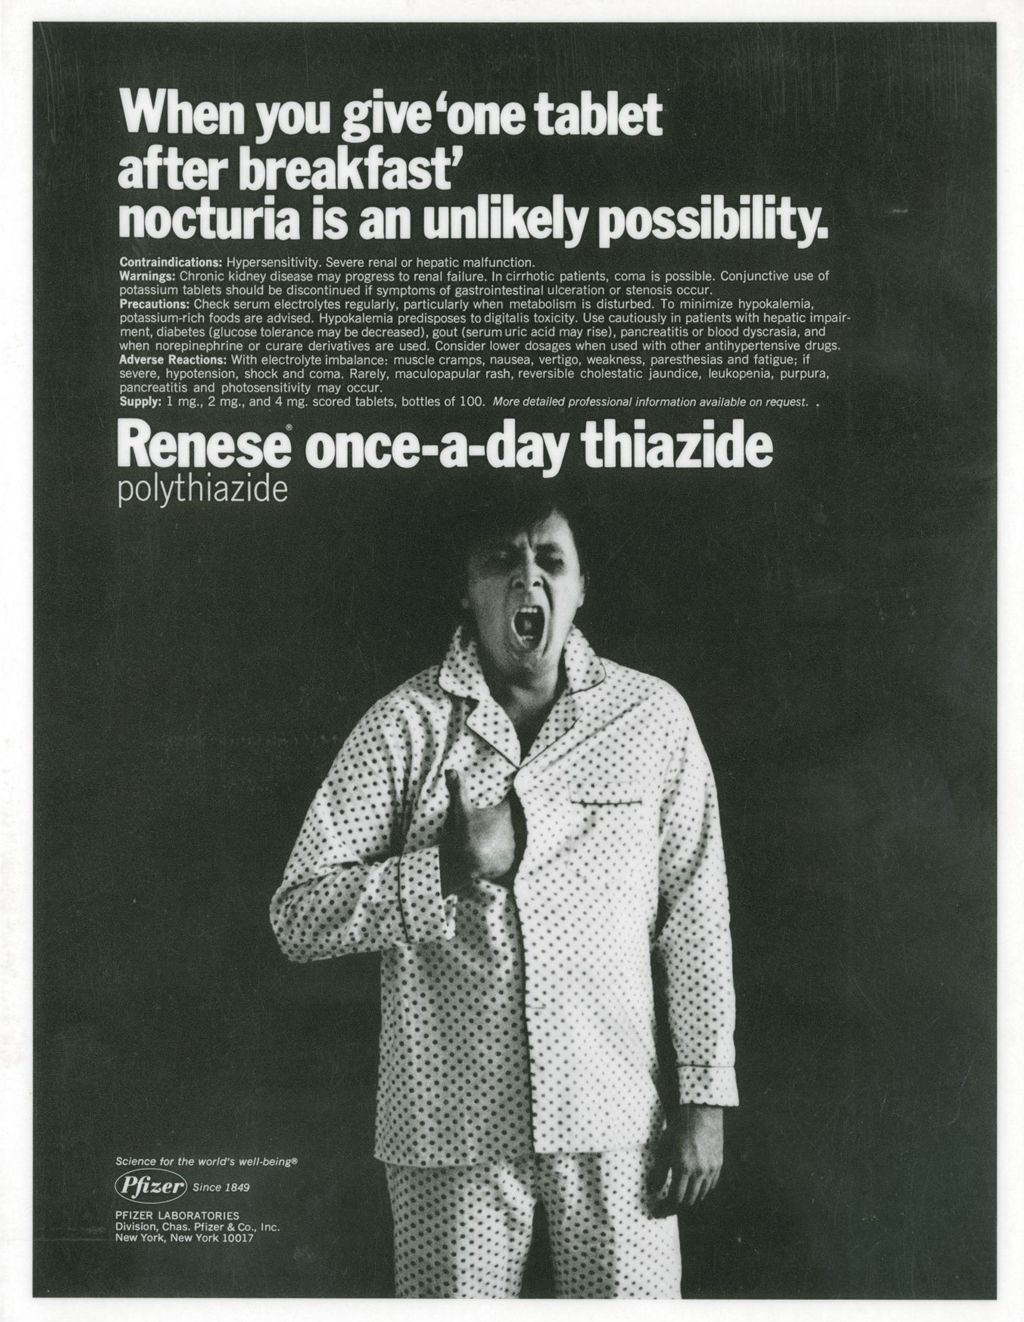 Advertisement for Renese once-a-day thiazide